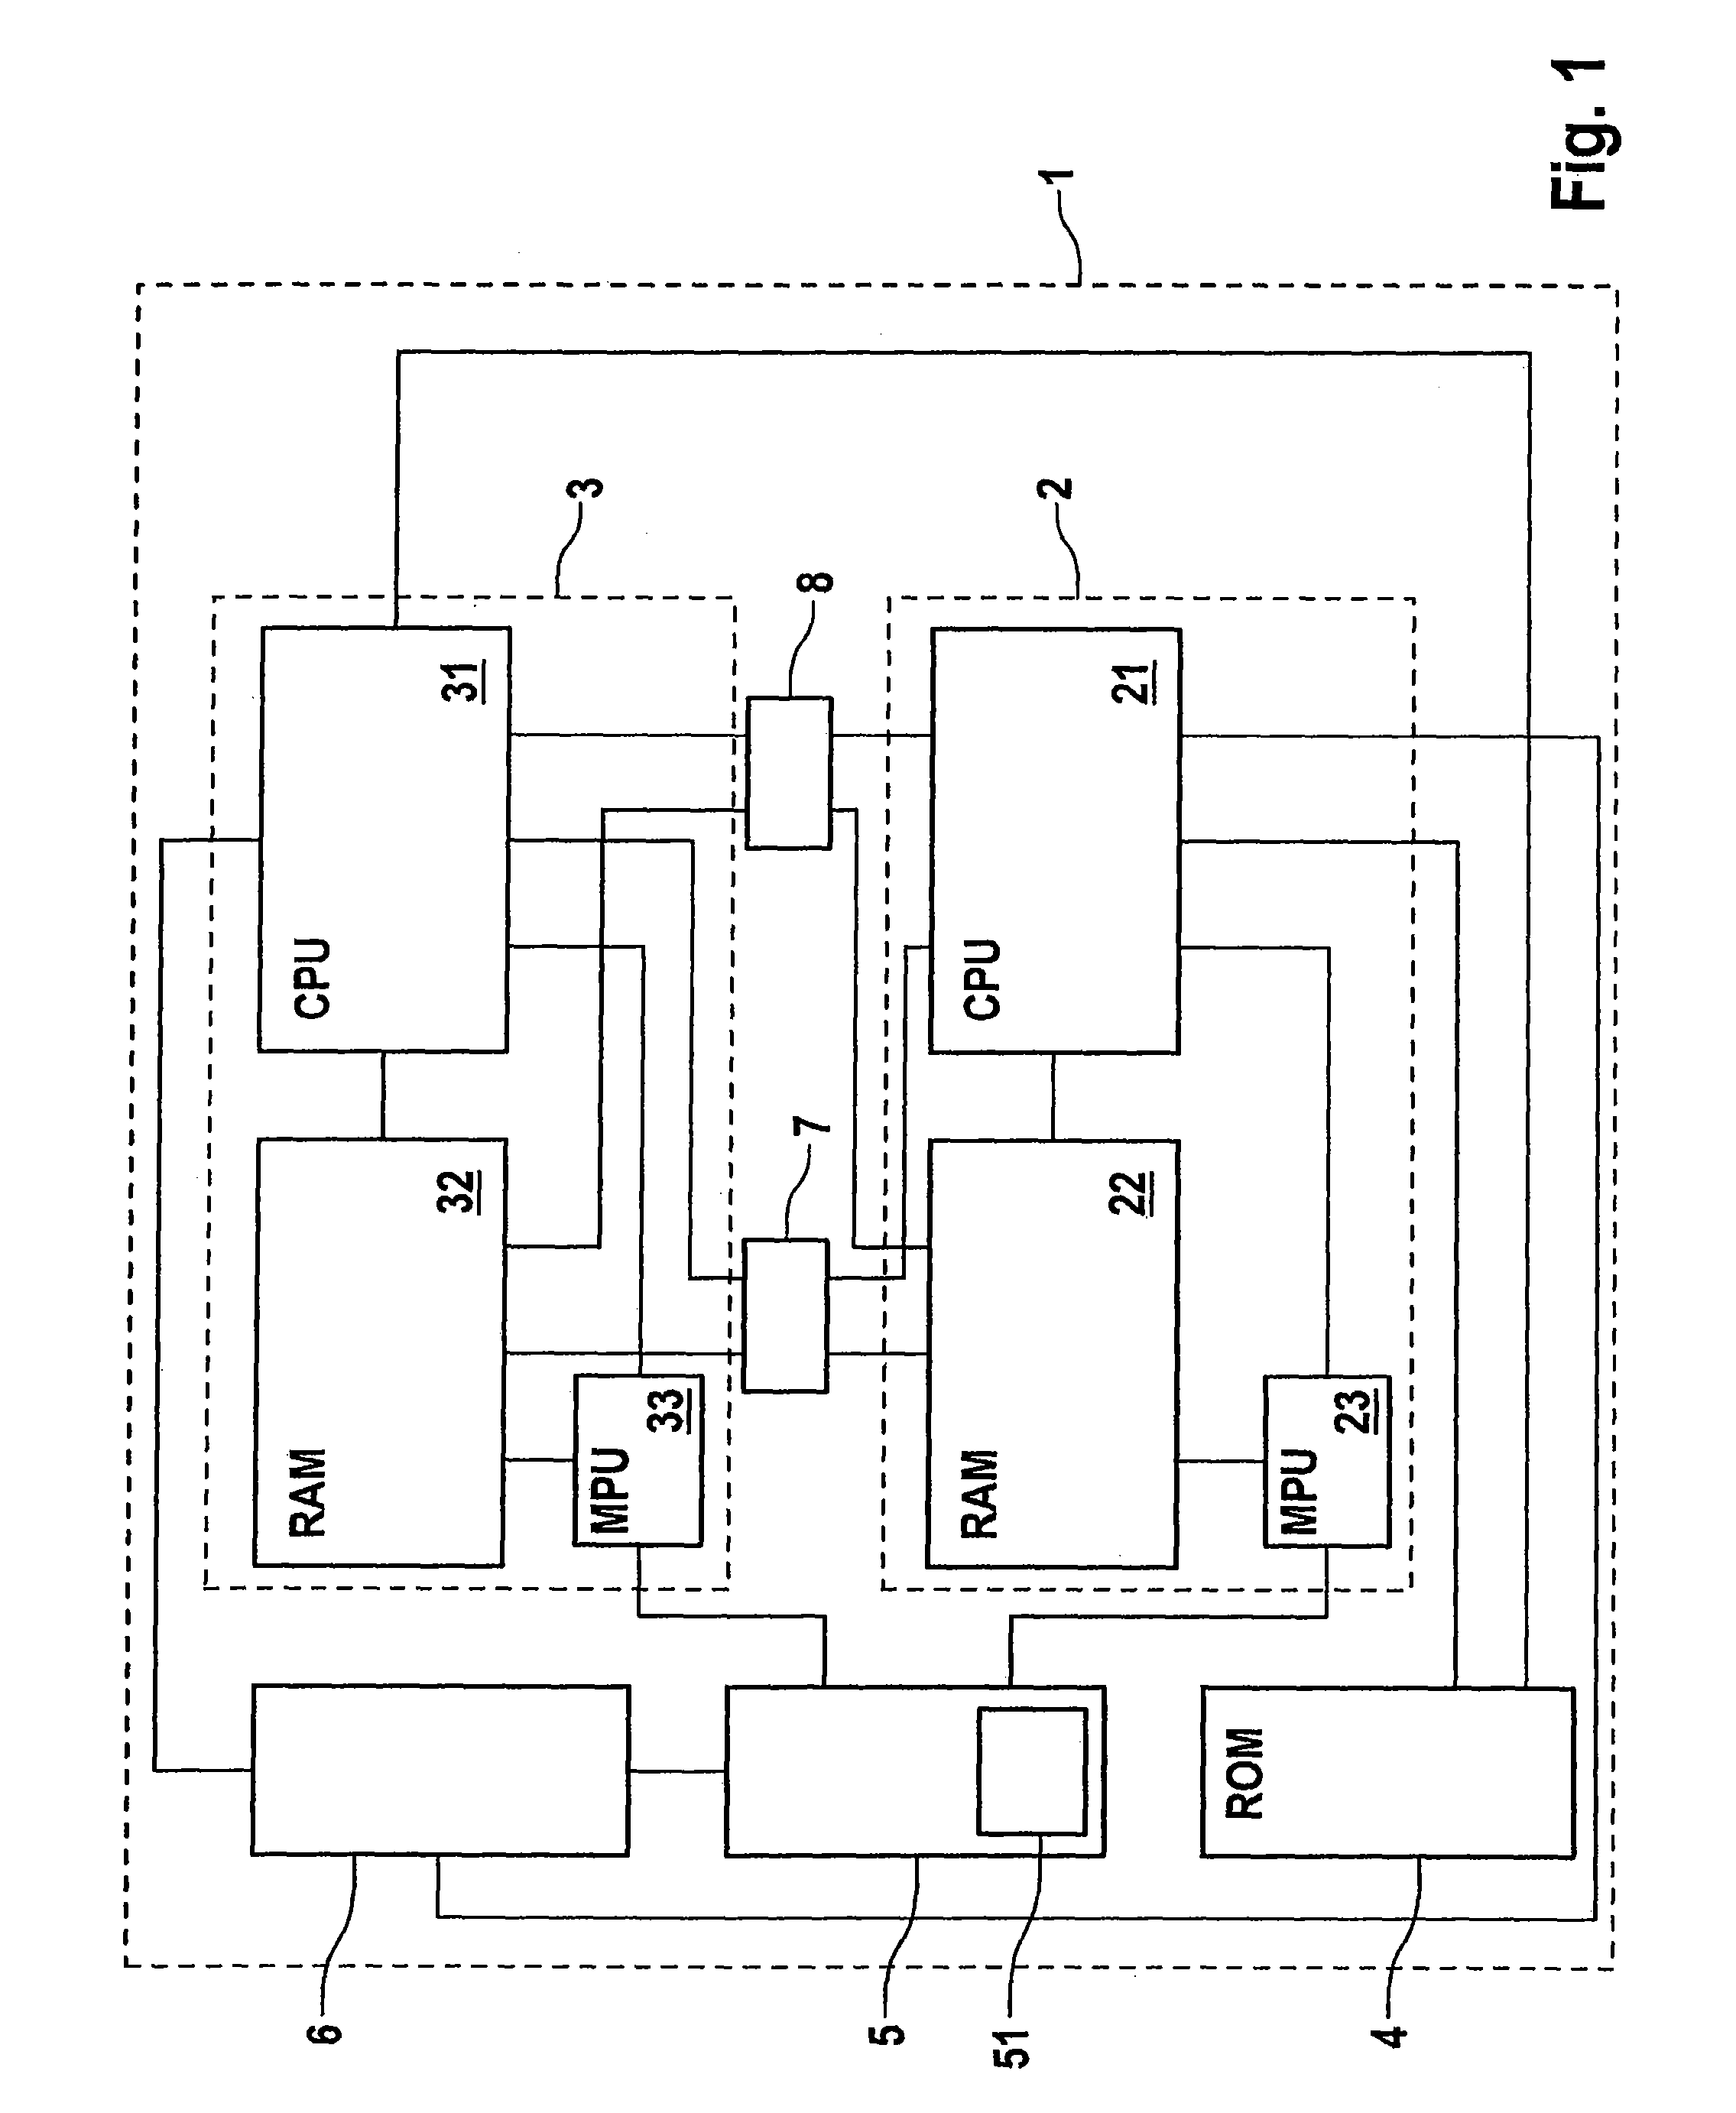 Integrated microprocessor system for safety-critical control systems including a main program and a monitoring program stored in a memory device